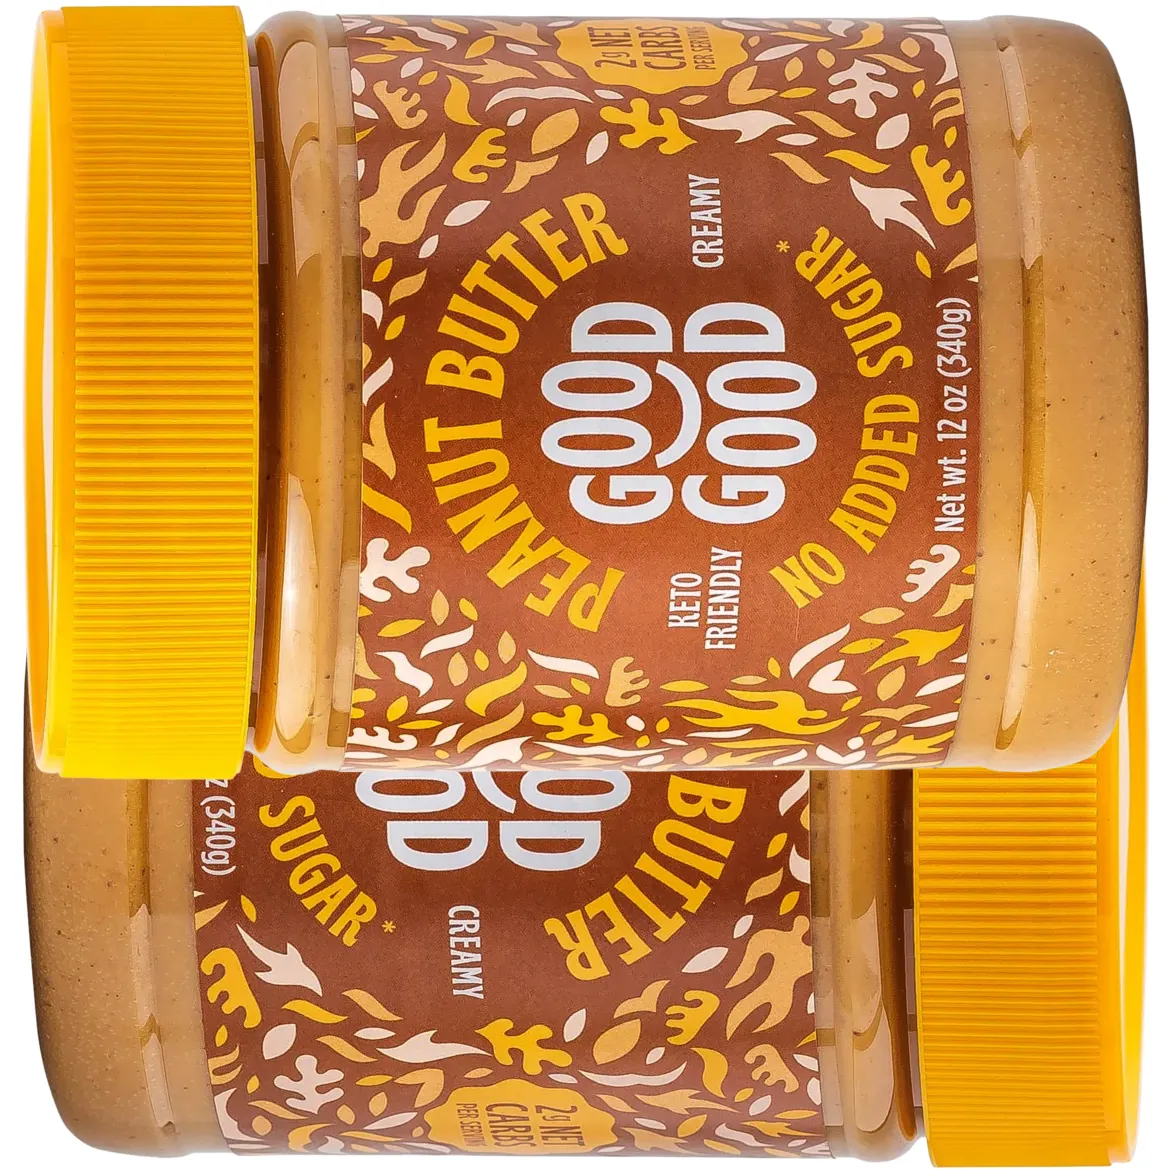 Free Natural Peanut Butter By Good Good